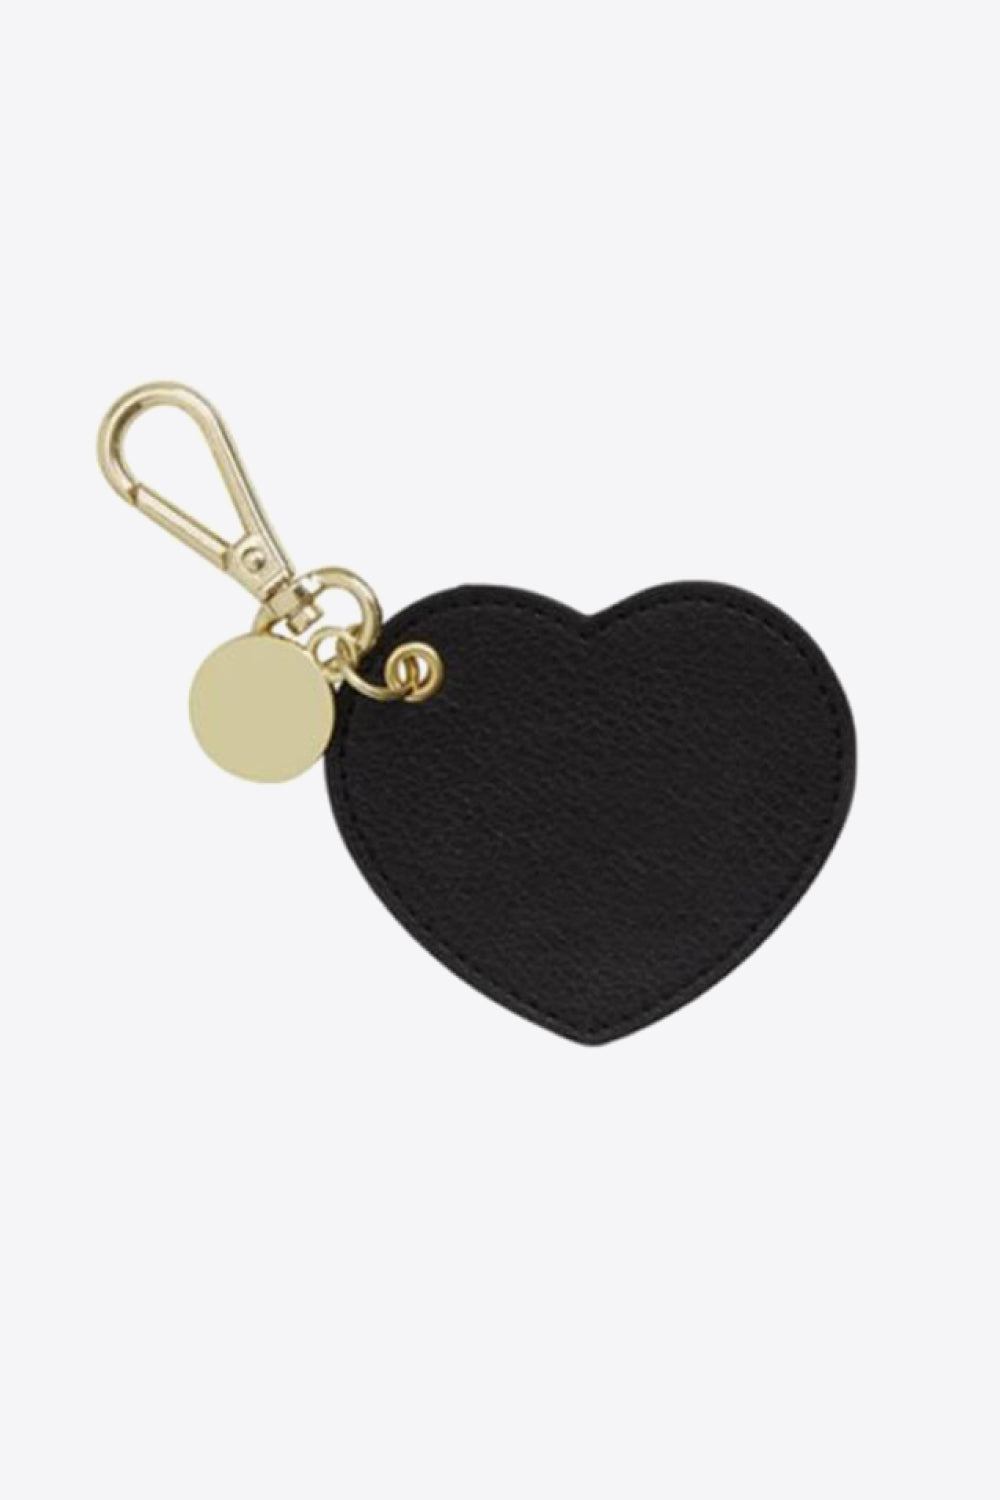 Trendsi Cupid Beauty Supplies Black / One Size Keychains Assorted 4-Pack Heart Shape PU Leather Keychain